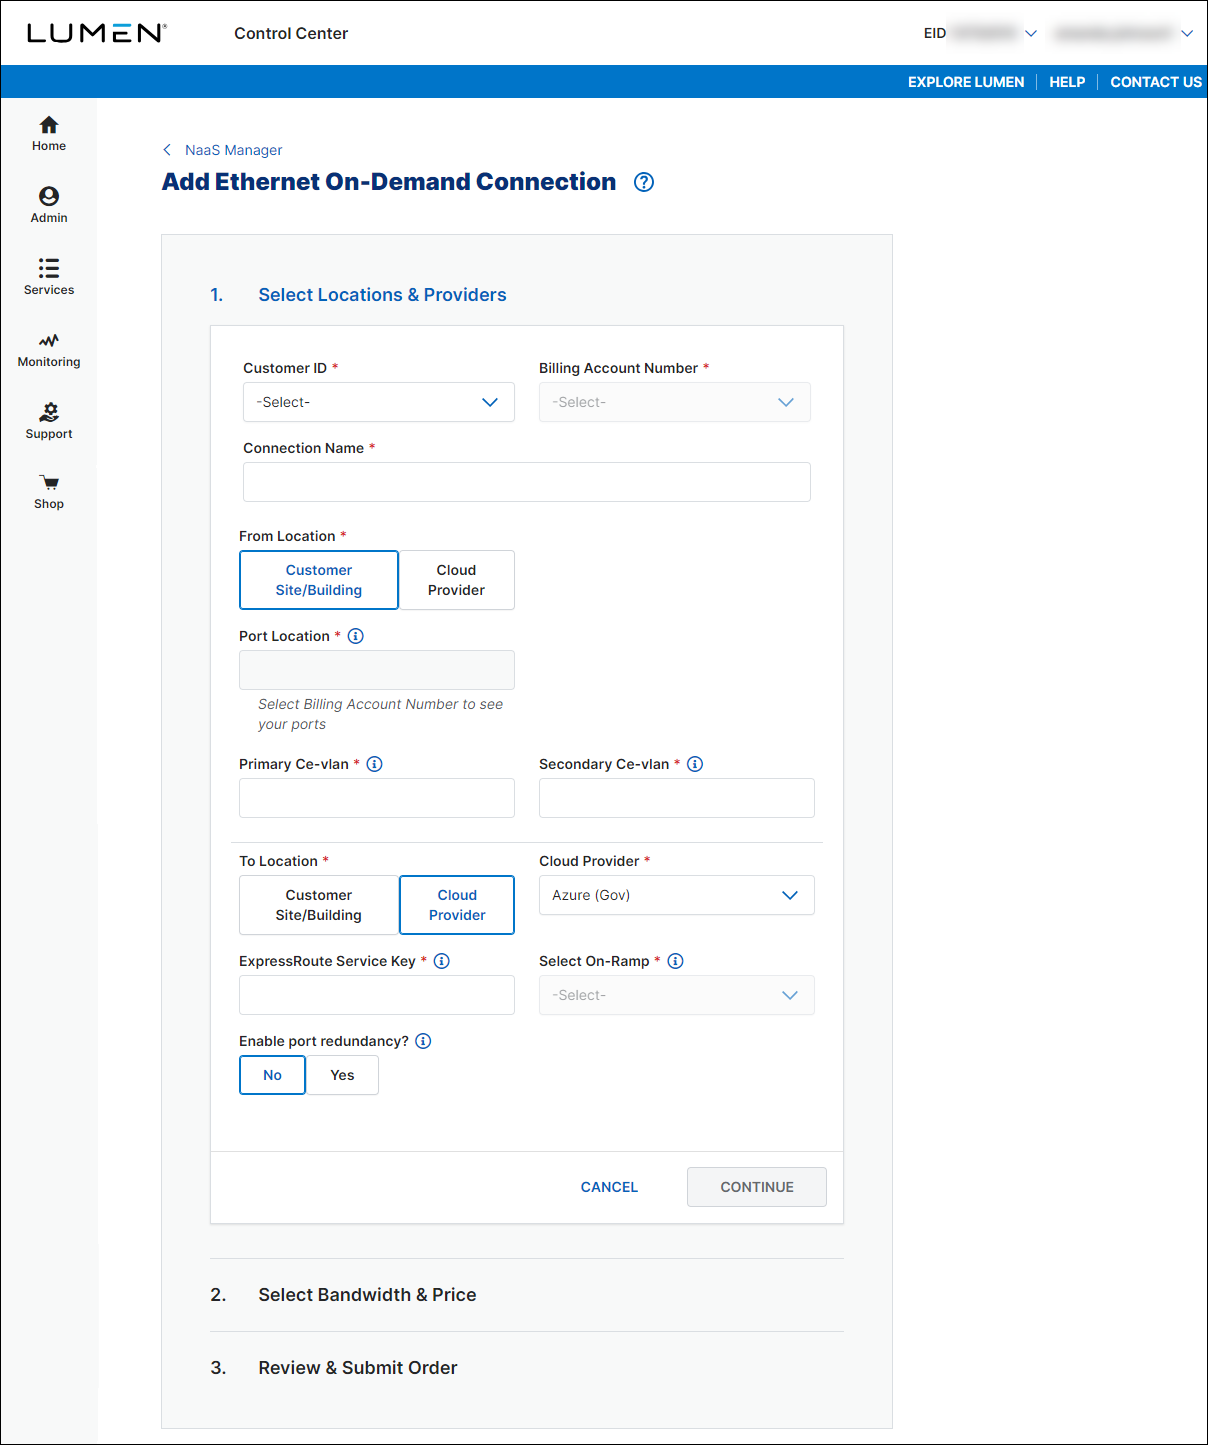 NaaS Ethernet On-Demand connection from your location to Azure Gov